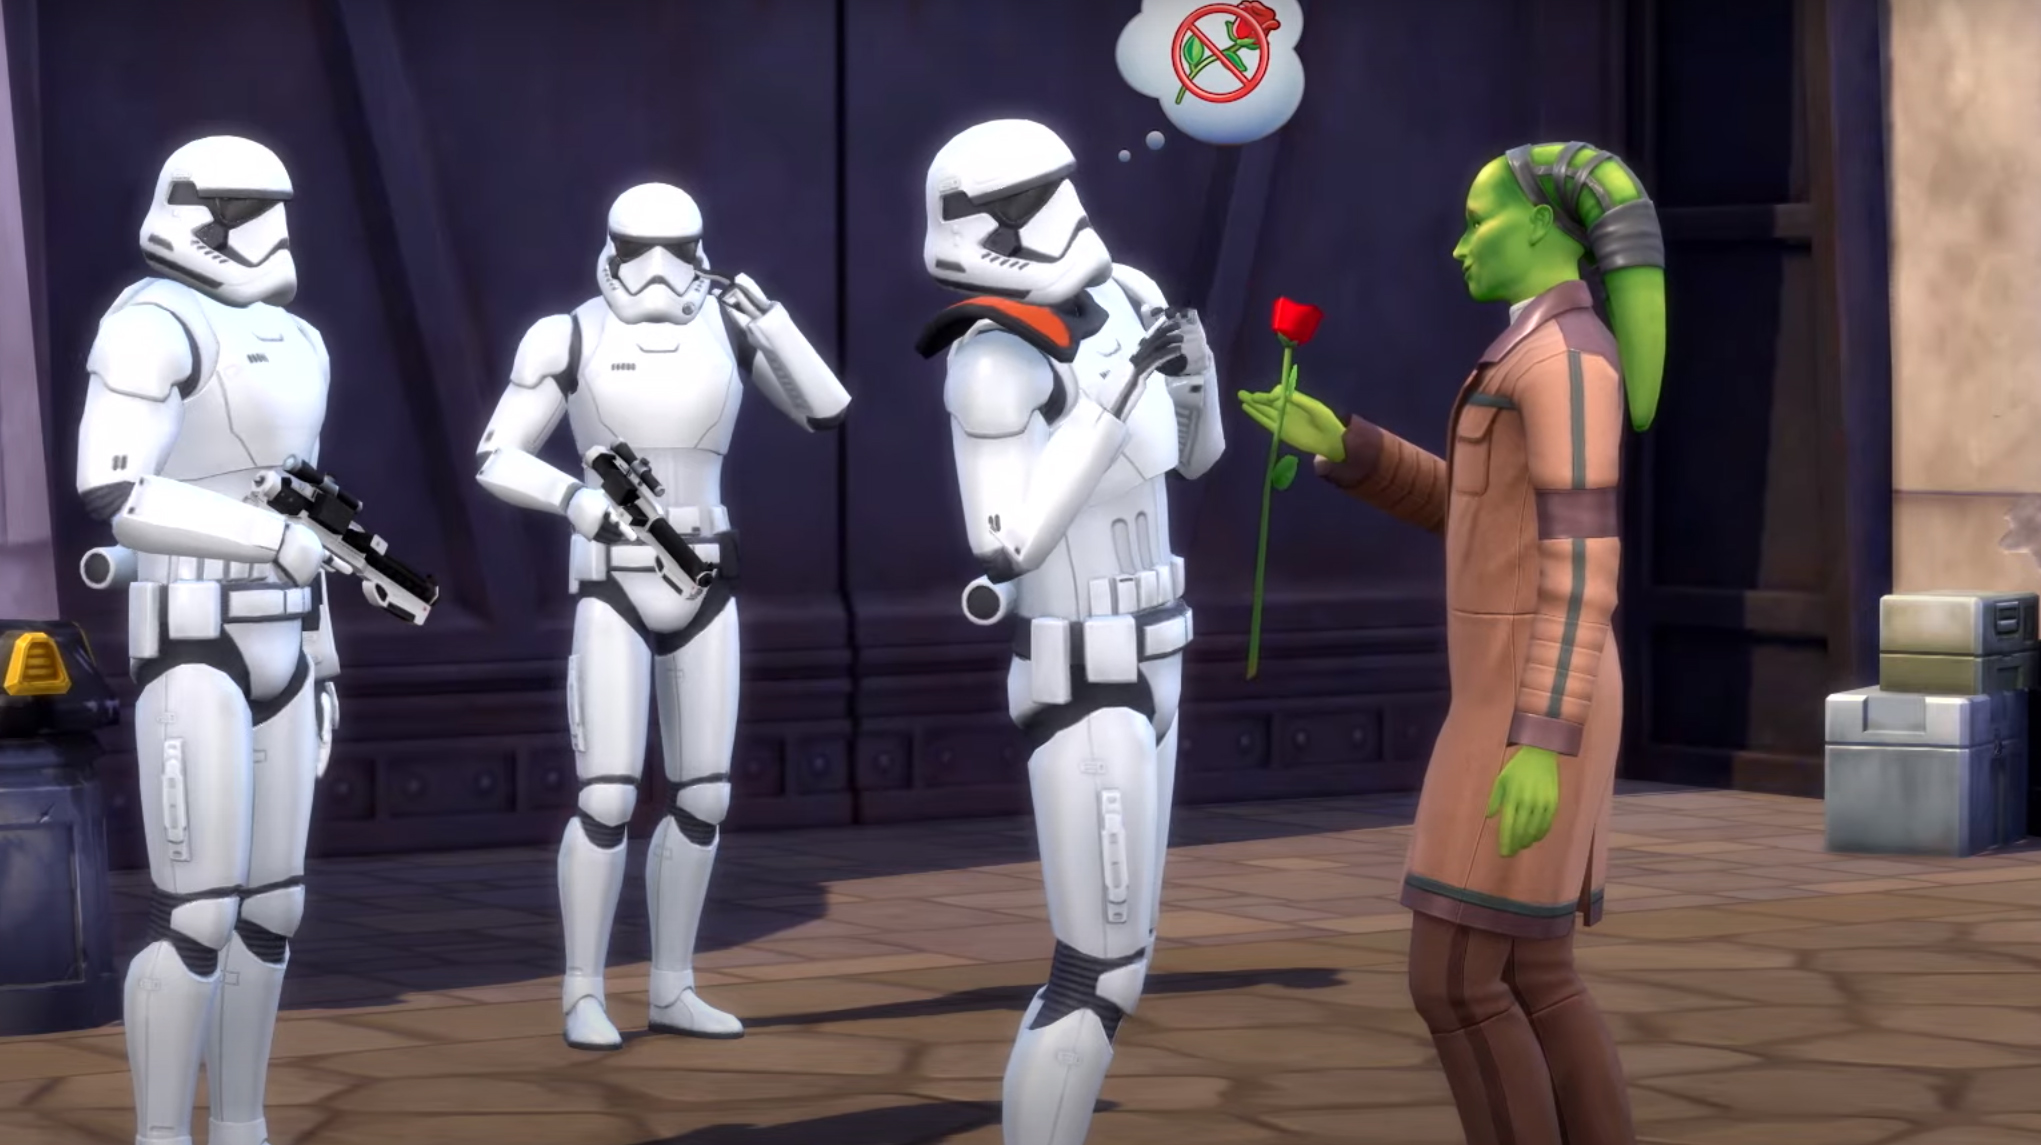 The Sims 4 Star Wars pack - a green Twi-lek gives a flower to stormtroopers